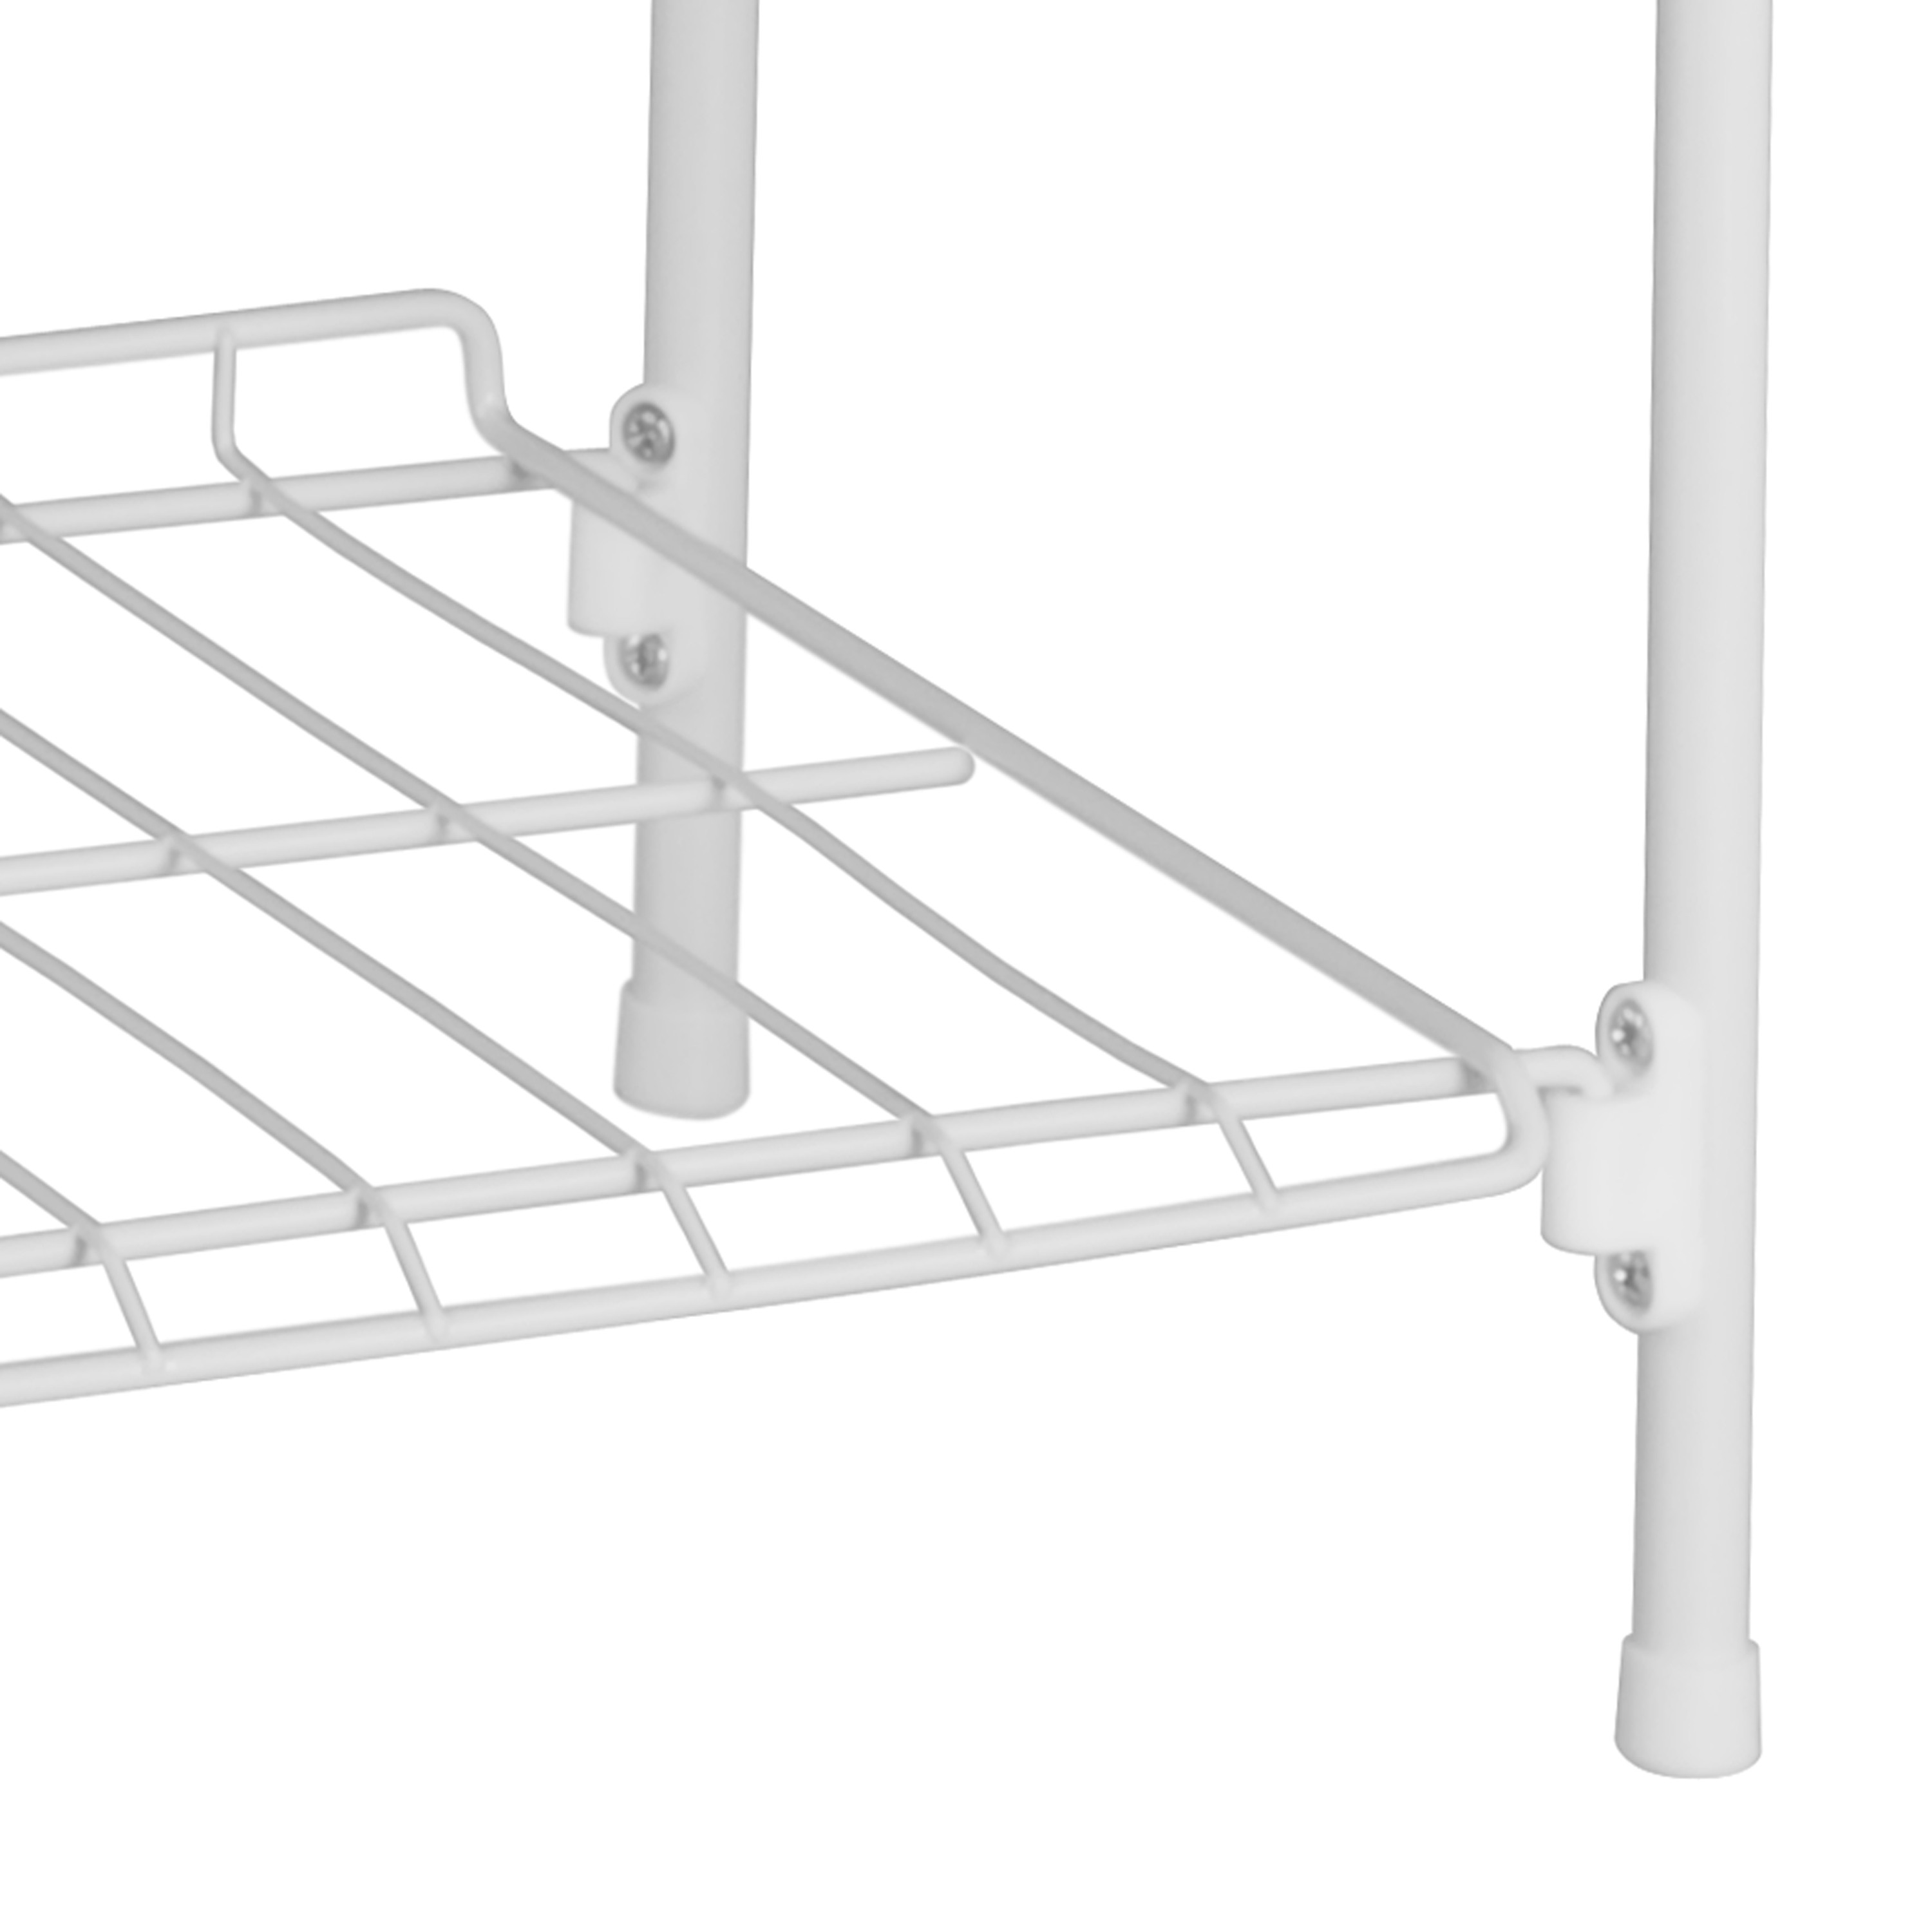 Honey Can Do 4-Tier White Metal Shoe Rack And Accessories Storage, White, Basement/Garage - image 5 of 8